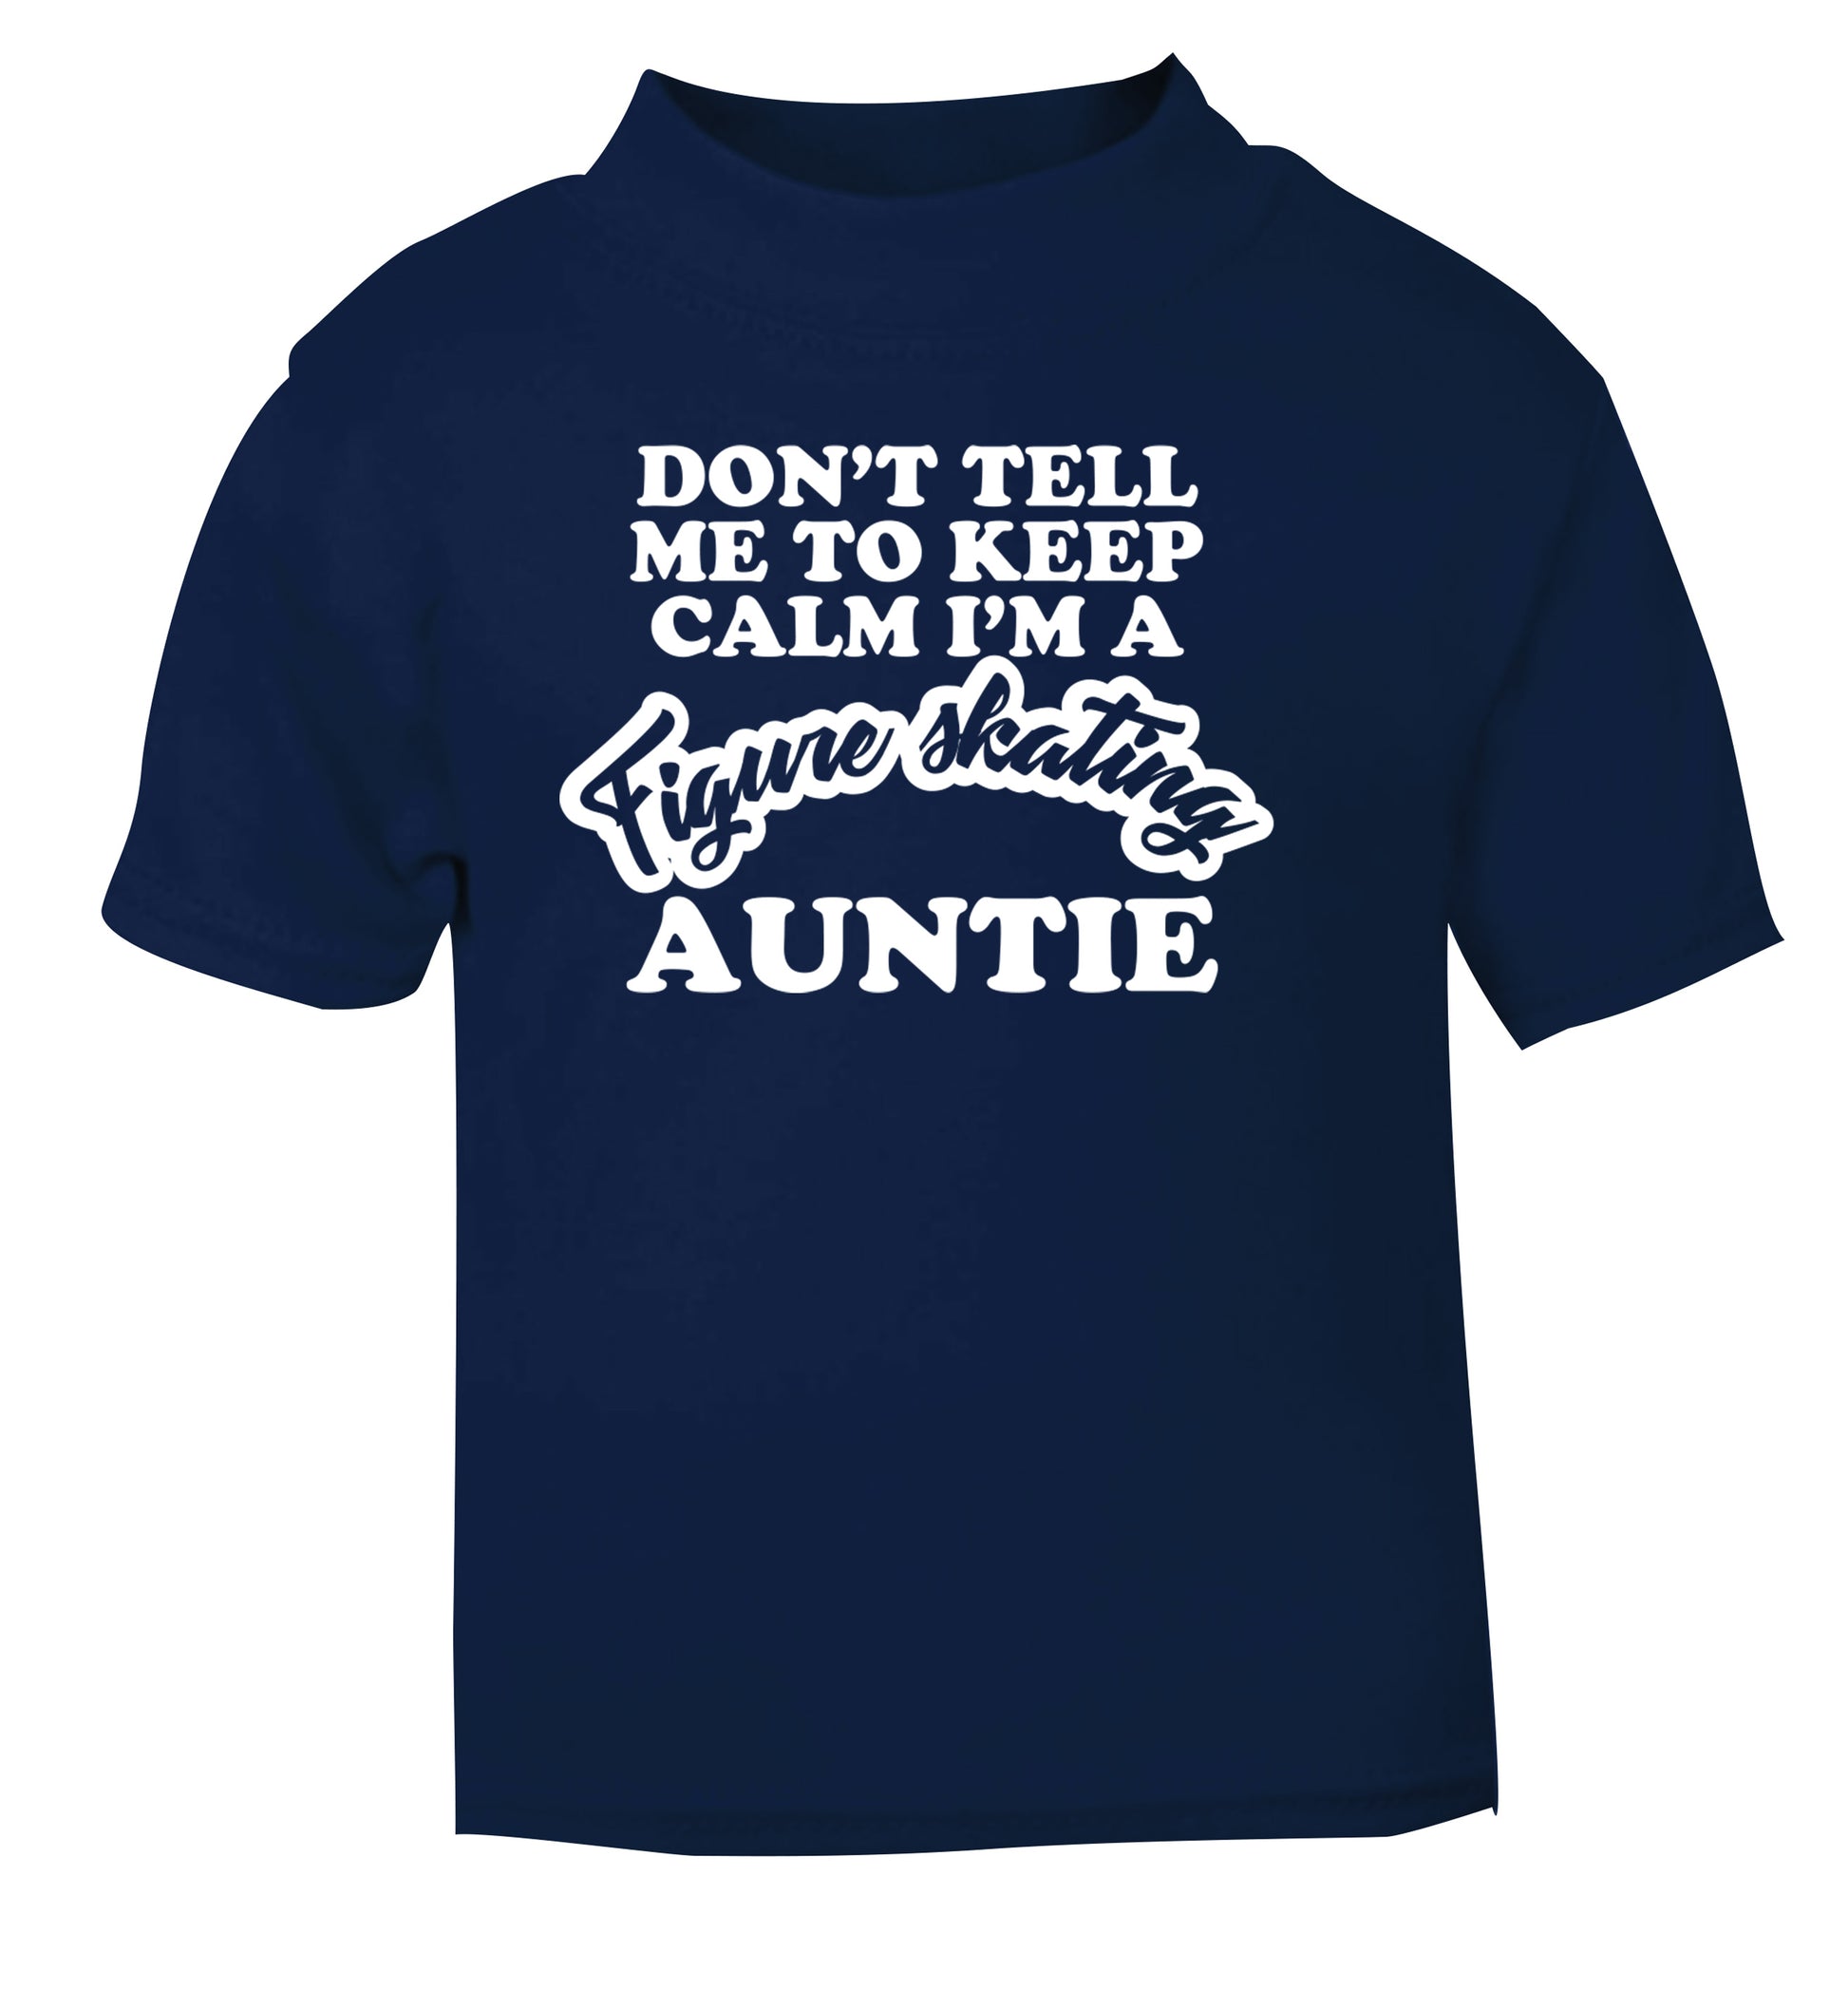 Don't tell me to keep calm I'm a figure skating auntie navy Baby Toddler Tshirt 2 Years